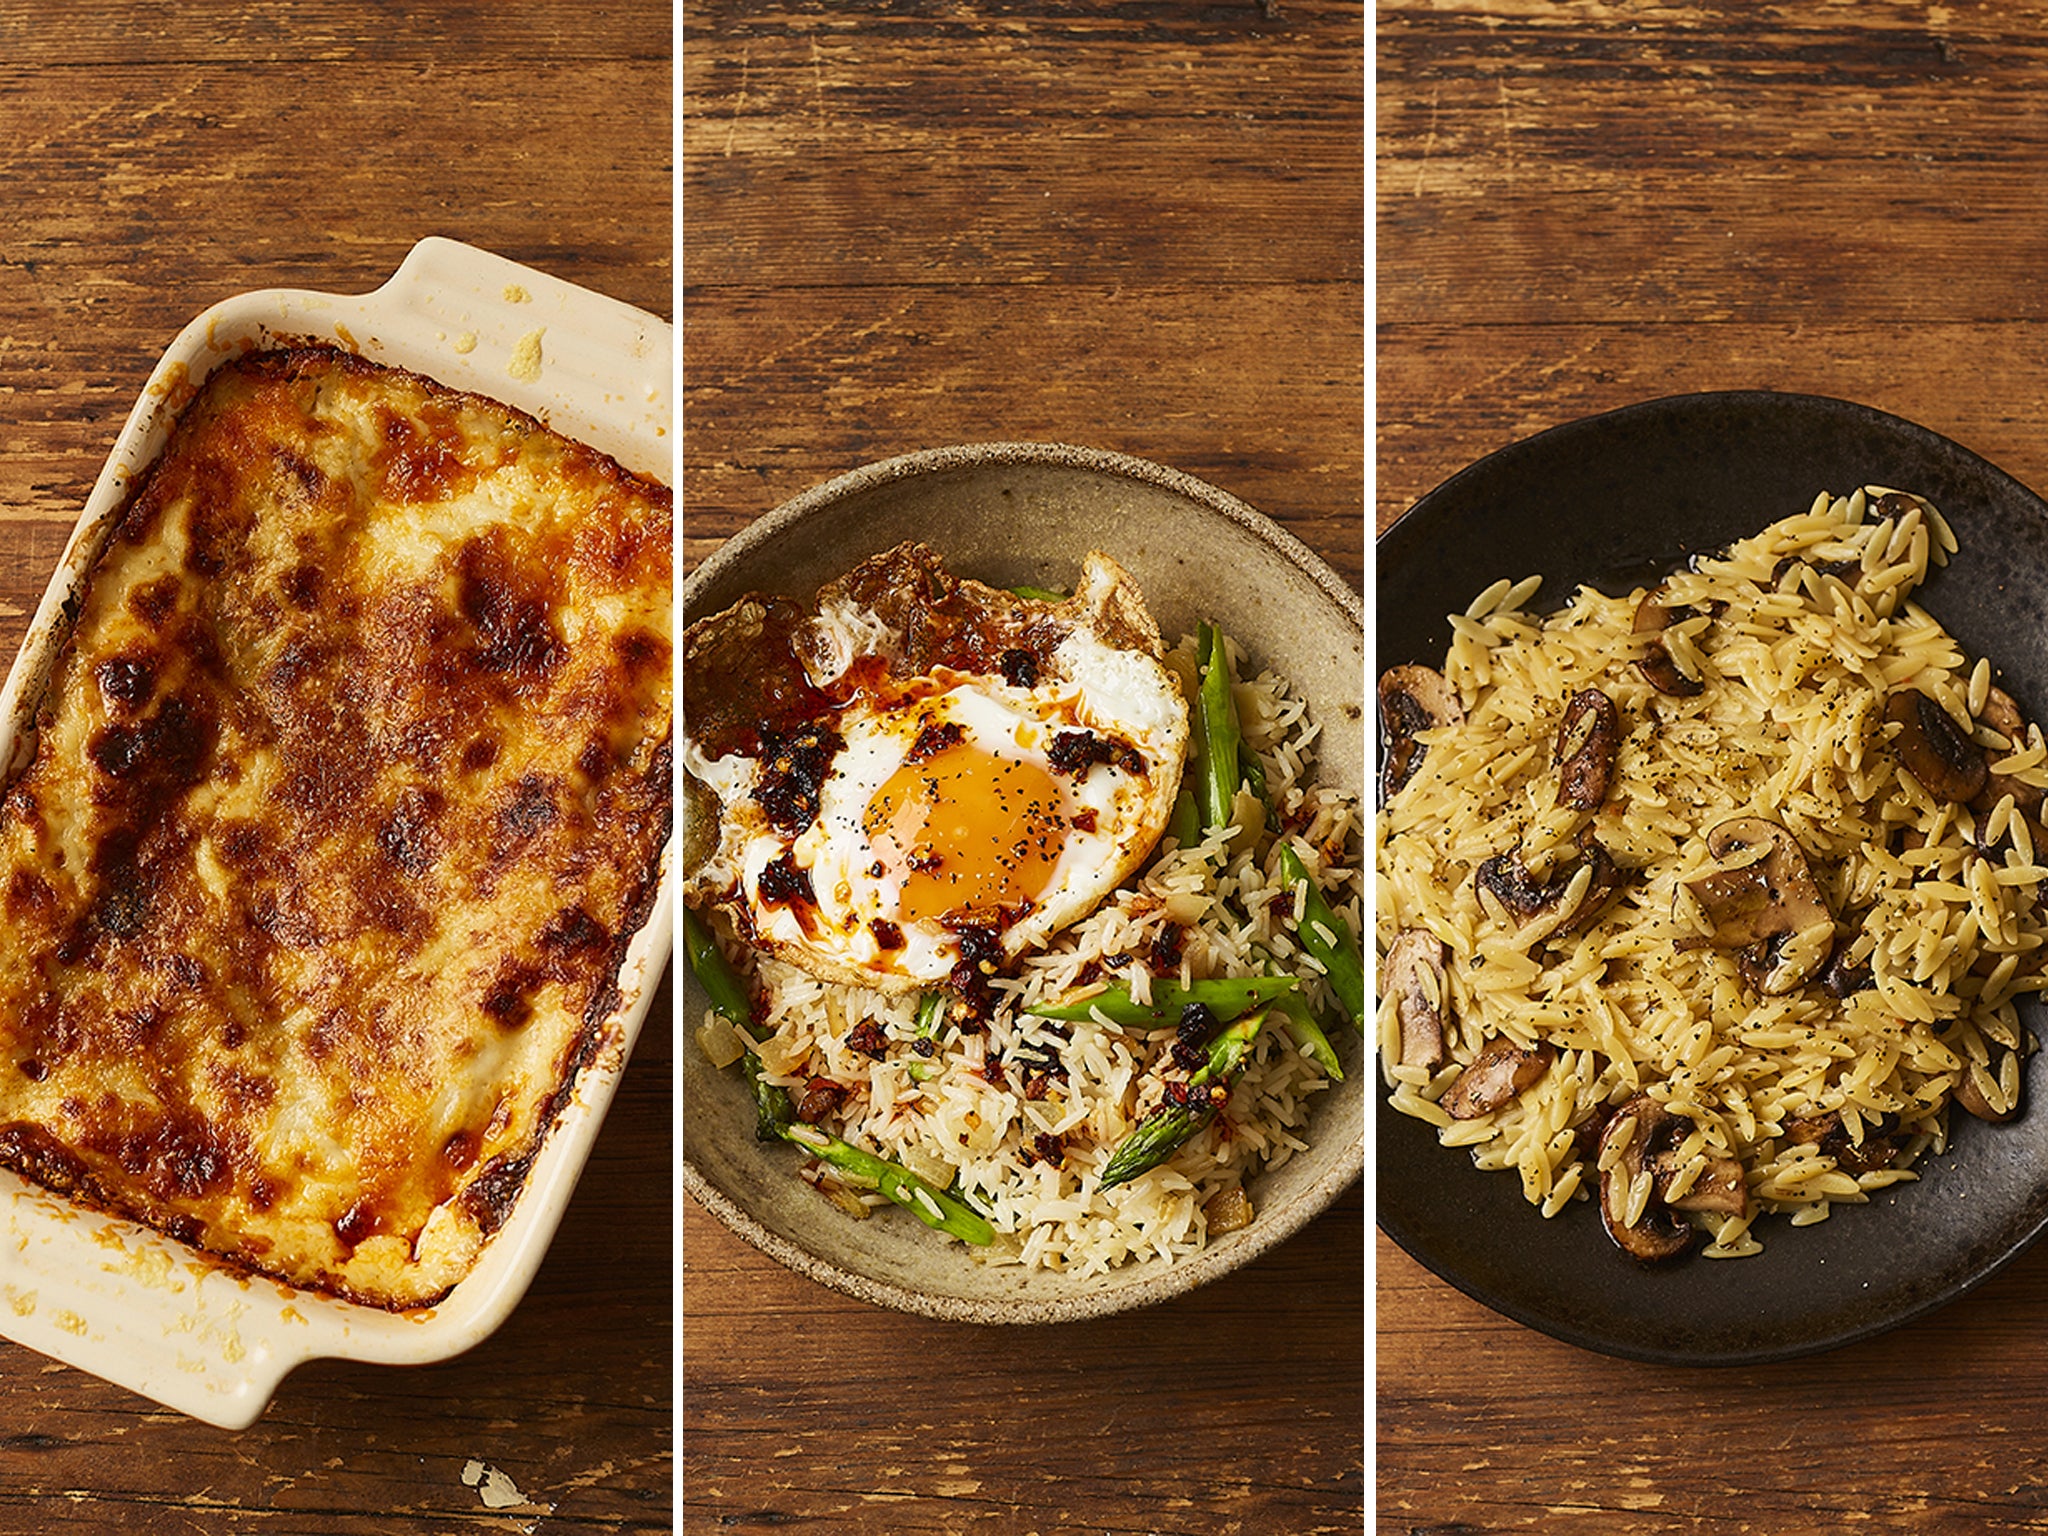 Legendary lasagne; asparagus fried rice with crispy chilli and egg; Miguel’s mushroom orzo